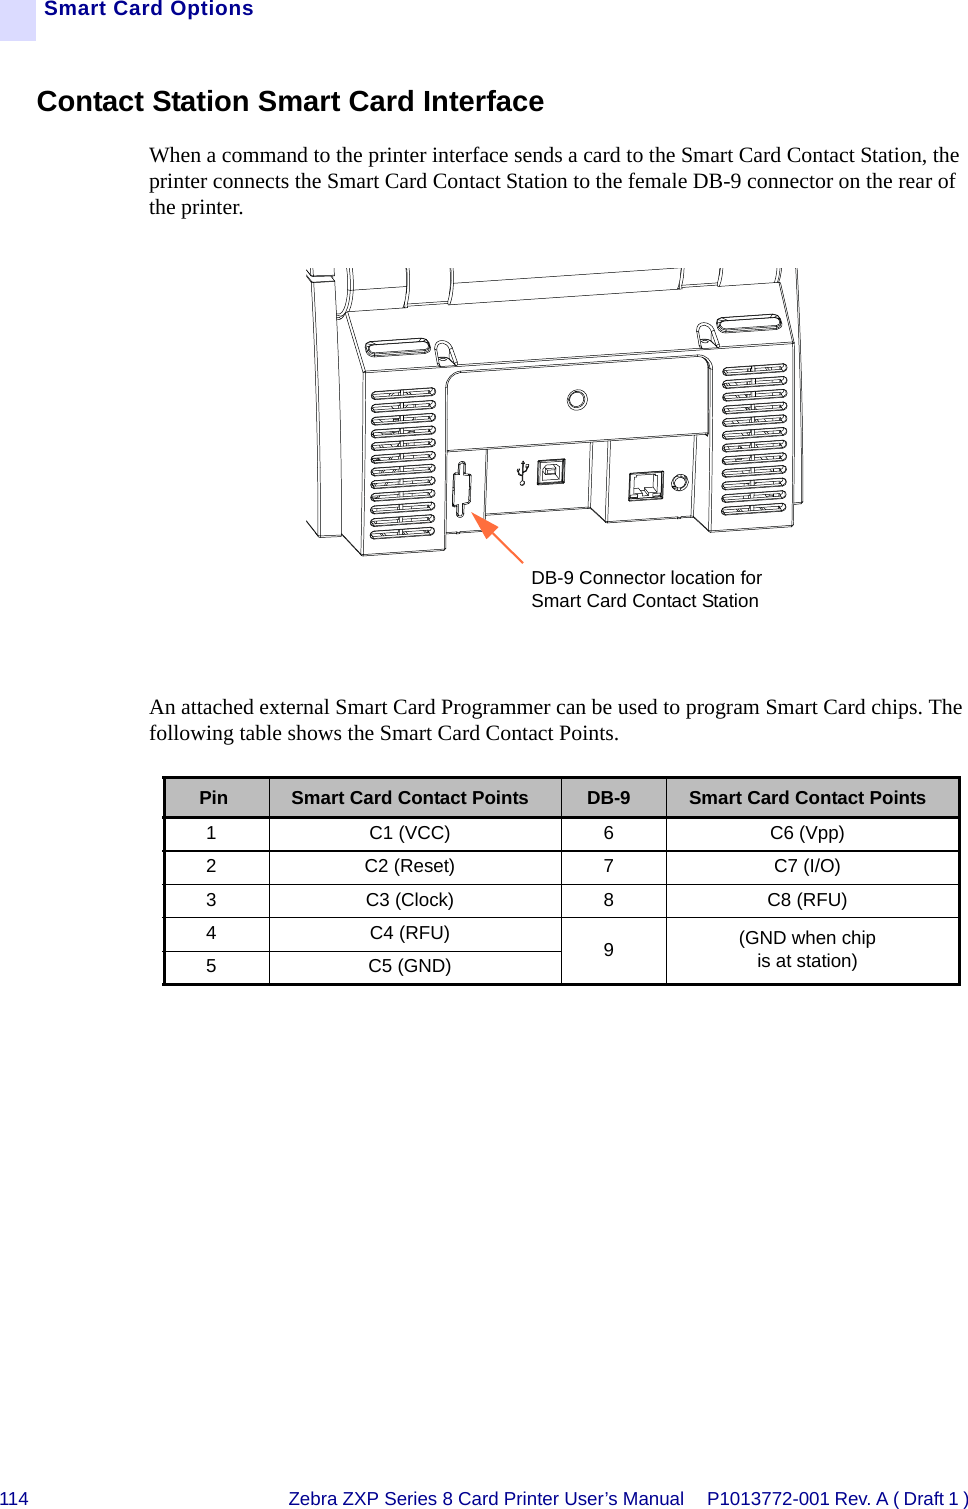 114 Zebra ZXP Series 8 Card Printer User’s Manual P1013772-001 Rev. A ( Draft 1 ) Smart Card OptionsContact Station Smart Card InterfaceWhen a command to the printer interface sends a card to the Smart Card Contact Station, the printer connects the Smart Card Contact Station to the female DB-9 connector on the rear of the printer.An attached external Smart Card Programmer can be used to program Smart Card chips. The following table shows the Smart Card Contact Points. Pin Smart Card Contact Points DB-9  Smart Card Contact Points1 C1 (VCC) 6 C6 (Vpp)2 C2 (Reset) 7 C7 (I/O)3 C3 (Clock) 8 C8 (RFU)4C4 (RFU)9(GND when chip is at station)5 C5 (GND)DB-9 Connector location for Smart Card Contact Station